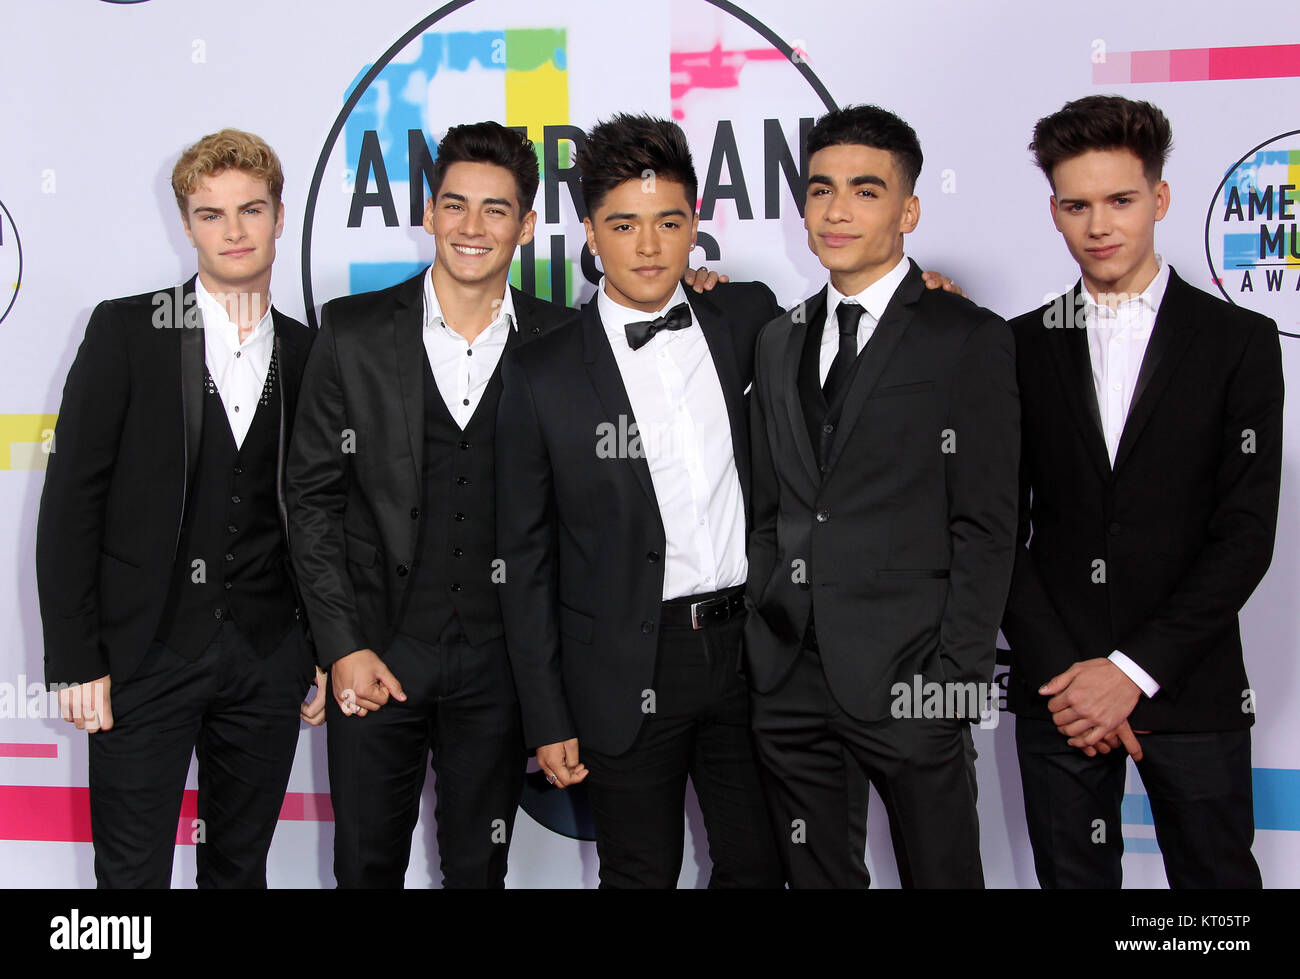 American Music Awards 2017 Arrivals held at the Microsoft Theater in Los Angeles, California  Featuring: Brady Tutton, Chance Perez, Drew Ramos, Sergio Calderon Jr., Michael Conor of ‘In Real Life’ Where: Los Angeles, California, United States When: 19 Nov 2017 Credit: Adriana M. Barraza/WENN.com Stock Photo